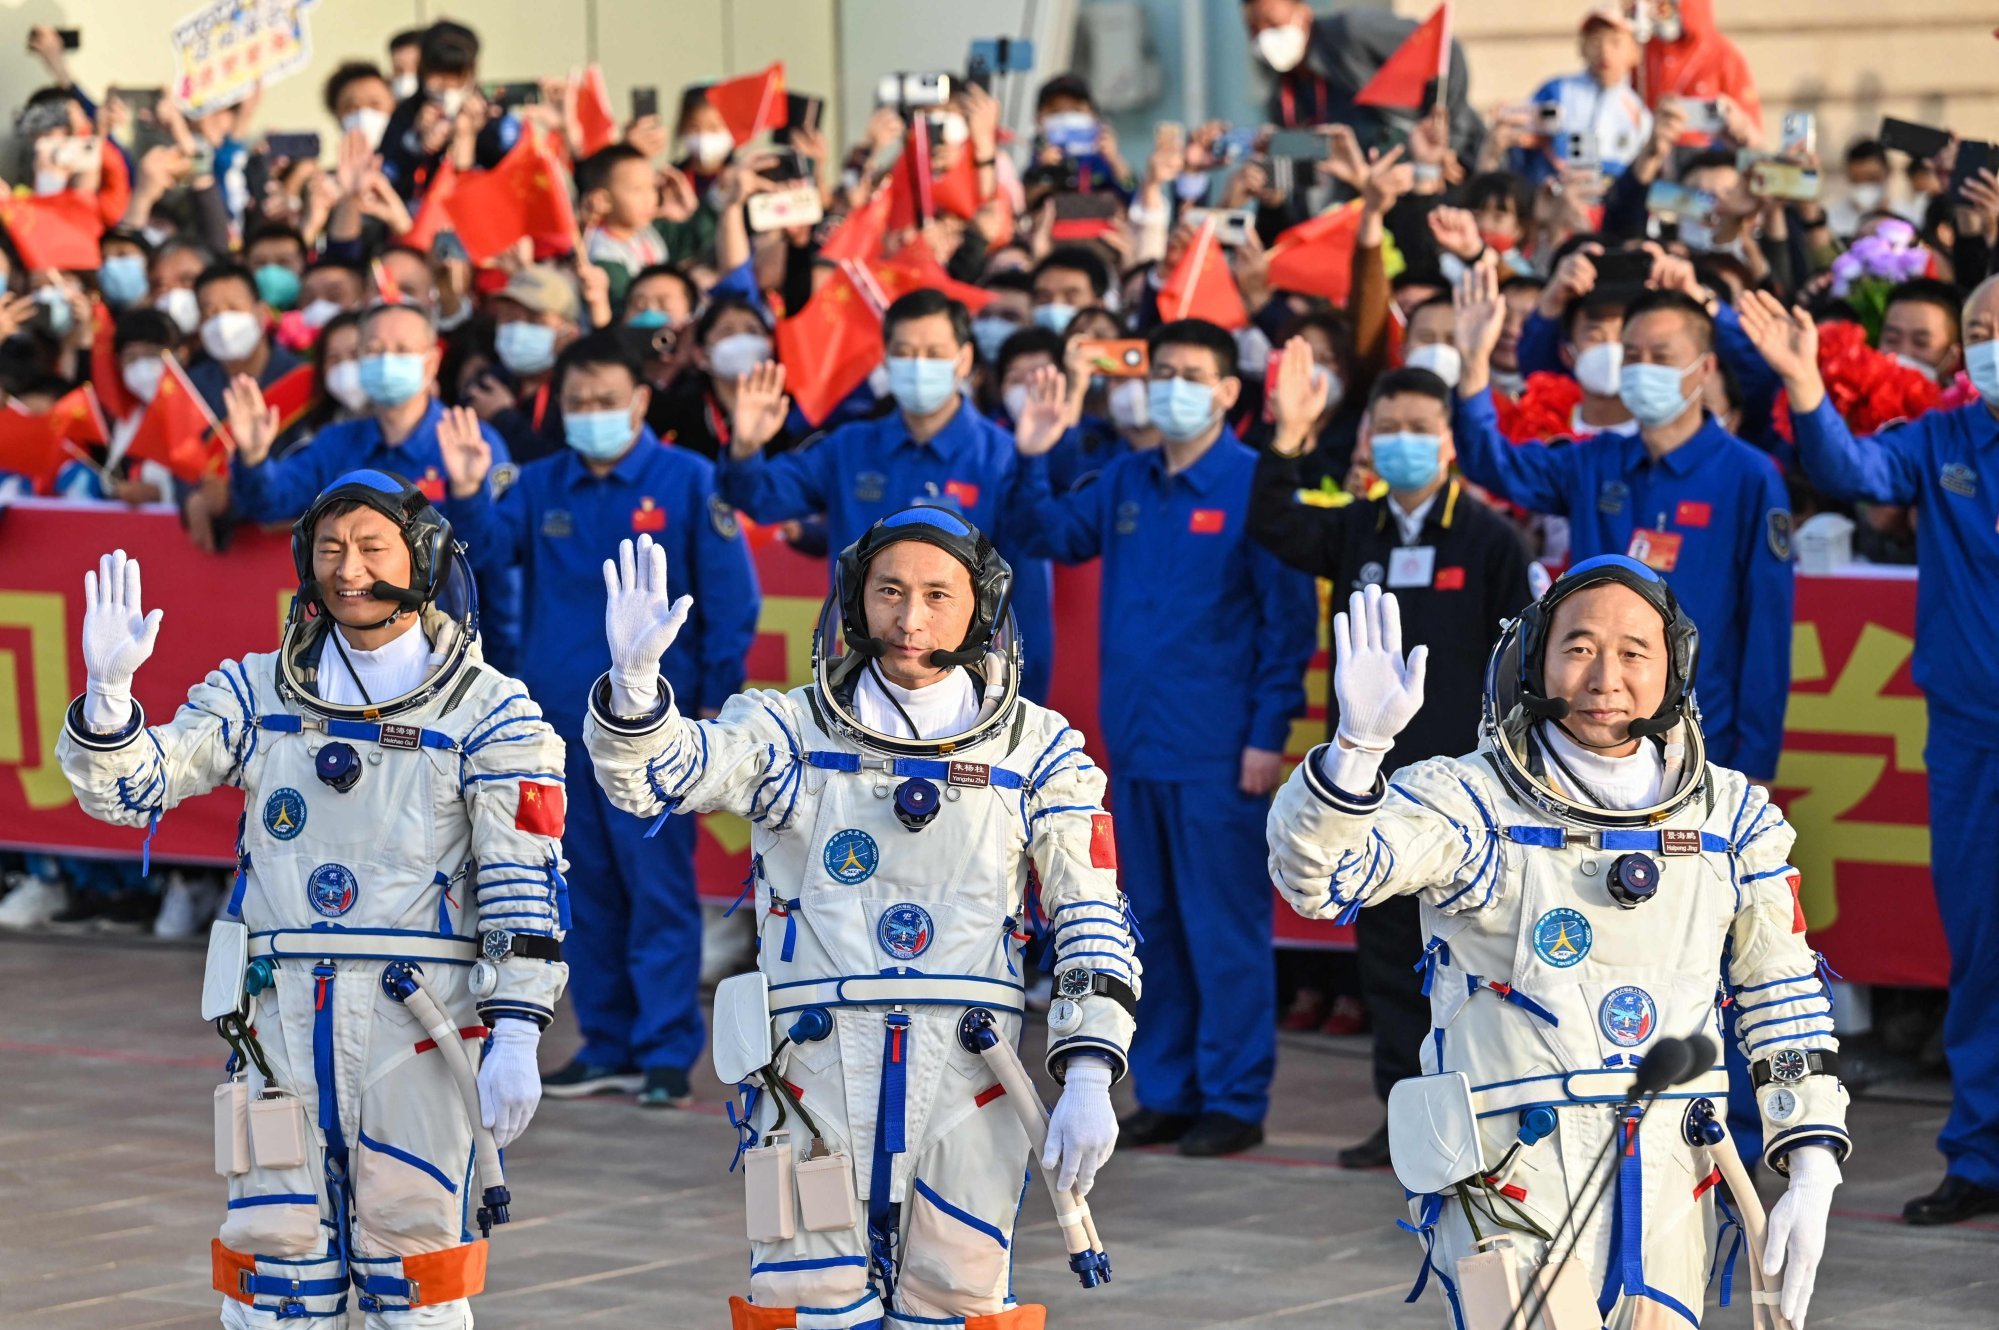 Chinese astronauts, from left, Gui Haichao, Zhu Yangzhu and commander Jing Haipeng wave goodbye before boarding the Shenzhou-16 manned space flight mission at the Jiuquan Launch Centre in the Gobi desert on Tuesday. Photo: AFP